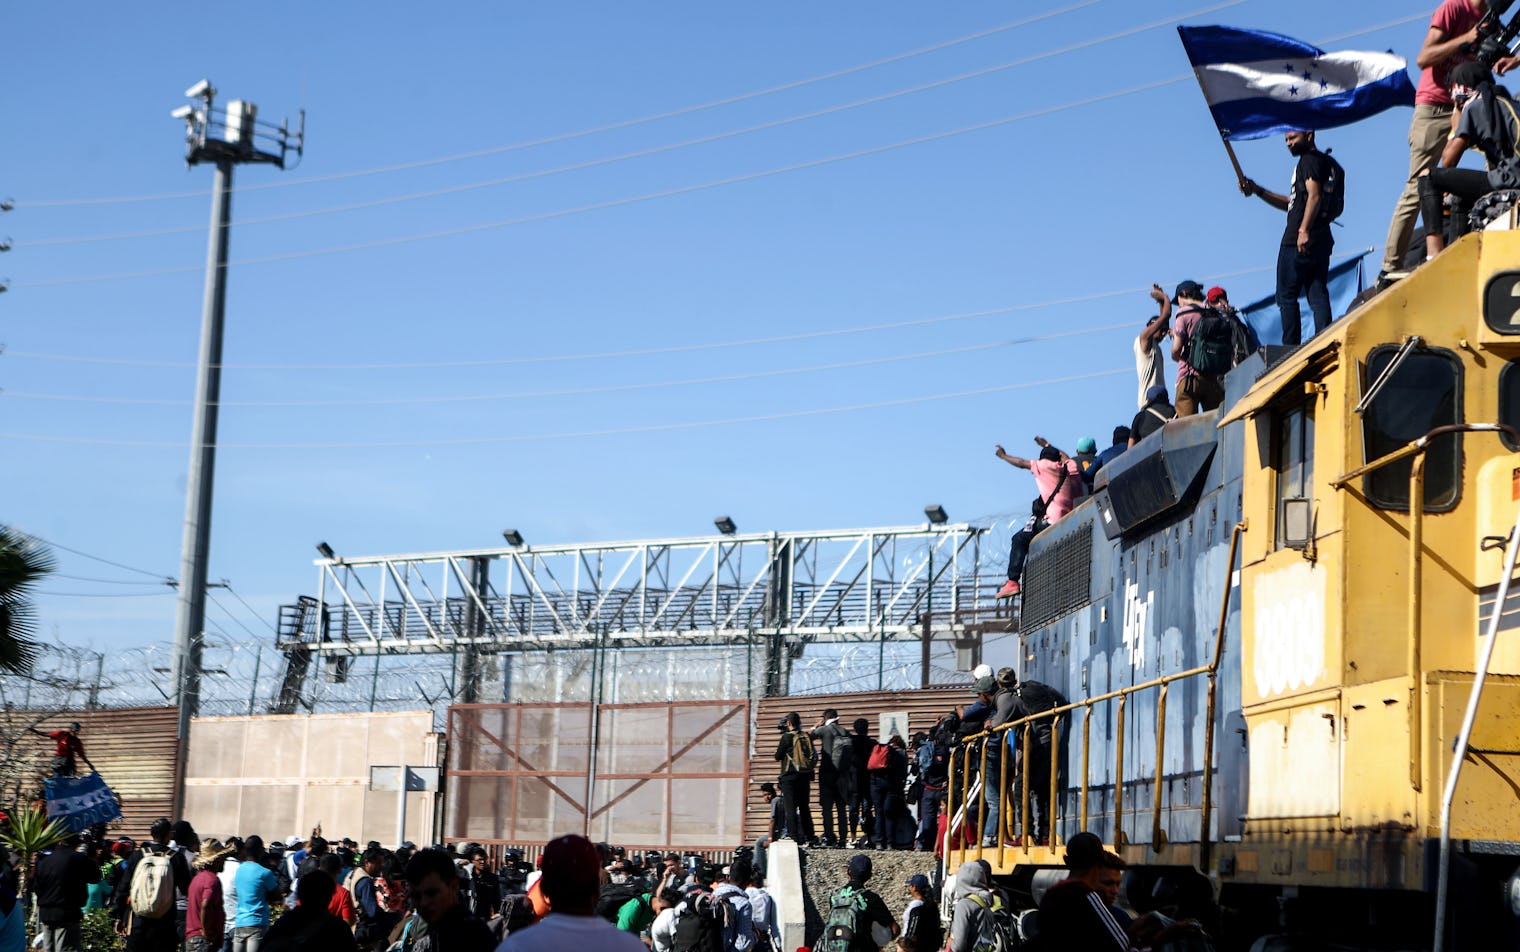 Photos From The USMexico Border Show The Stark Reality Of What’s